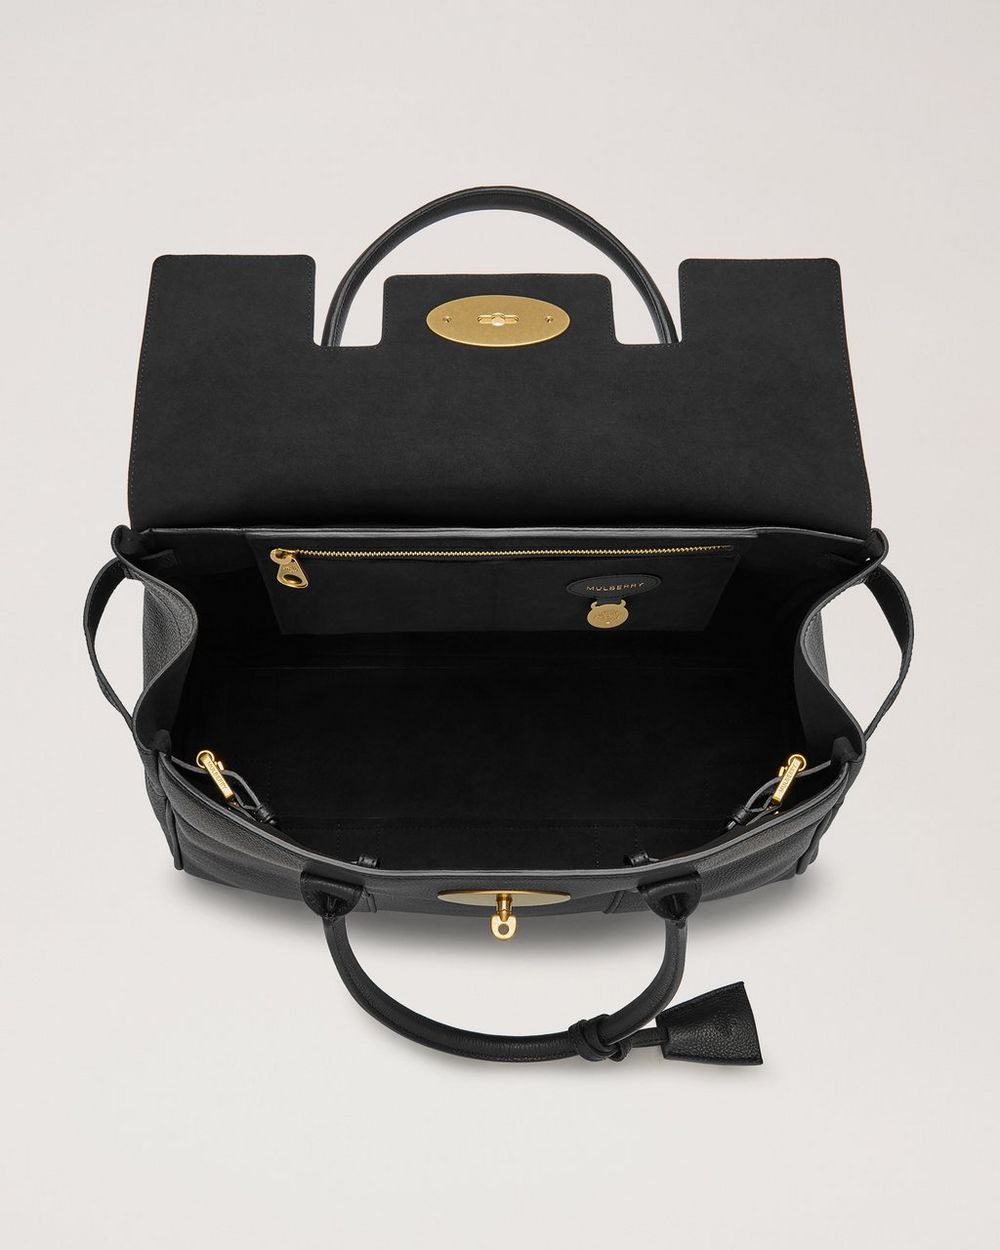 An Investment Bag: Mulberry Bayswater in Black Soft Gold Grainy Print